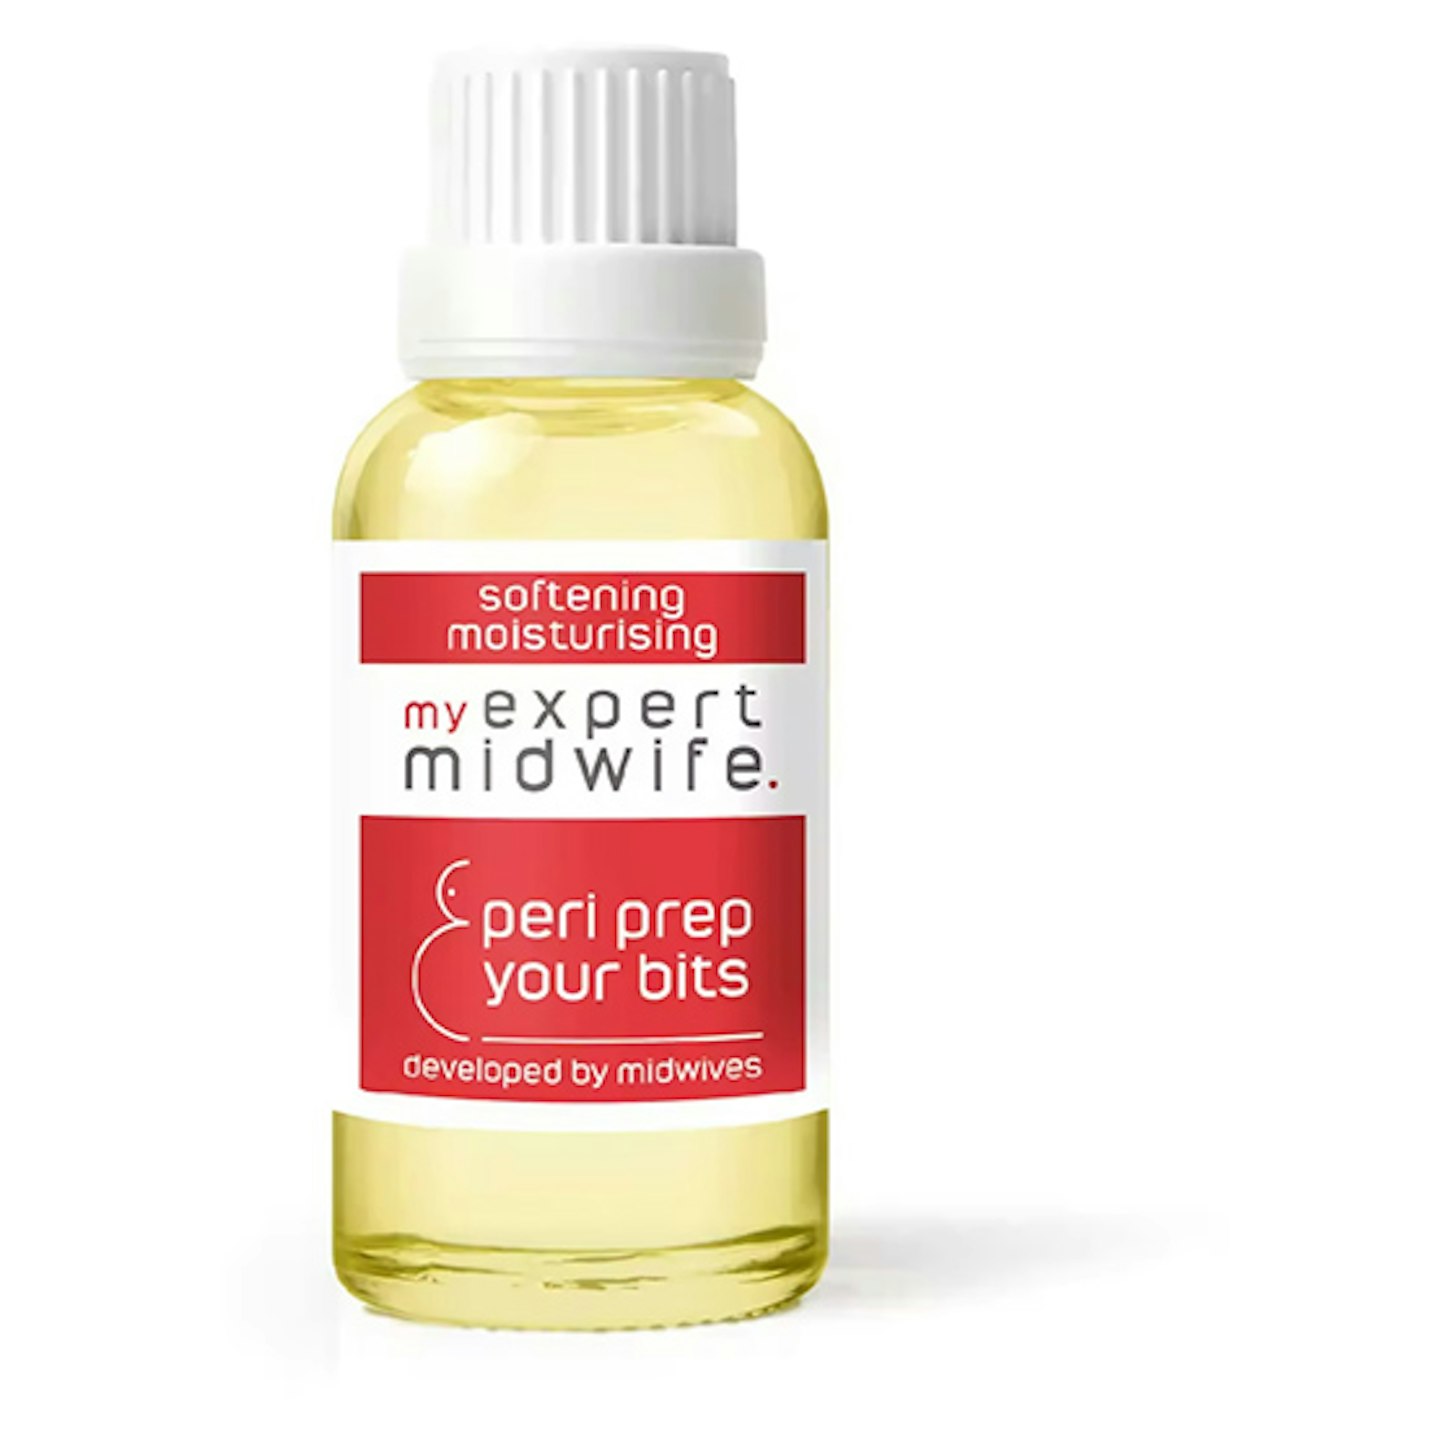 My Expert Midwife Peri Prep Your Bits 30ml Perineal Massage Oil